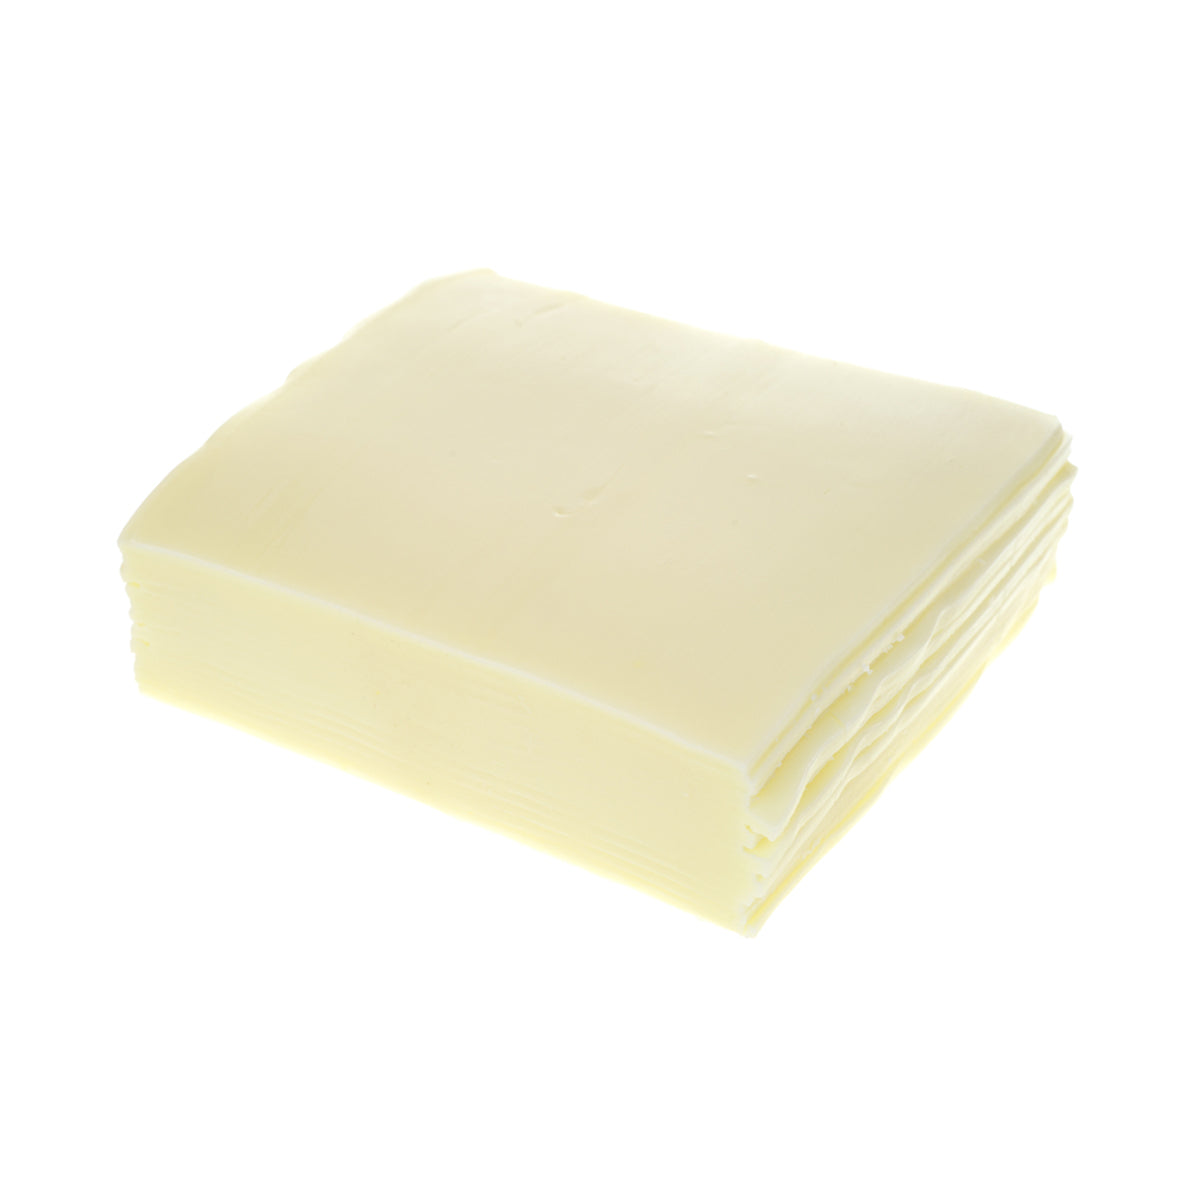 Murray's Sliced White Cheddar Cheese